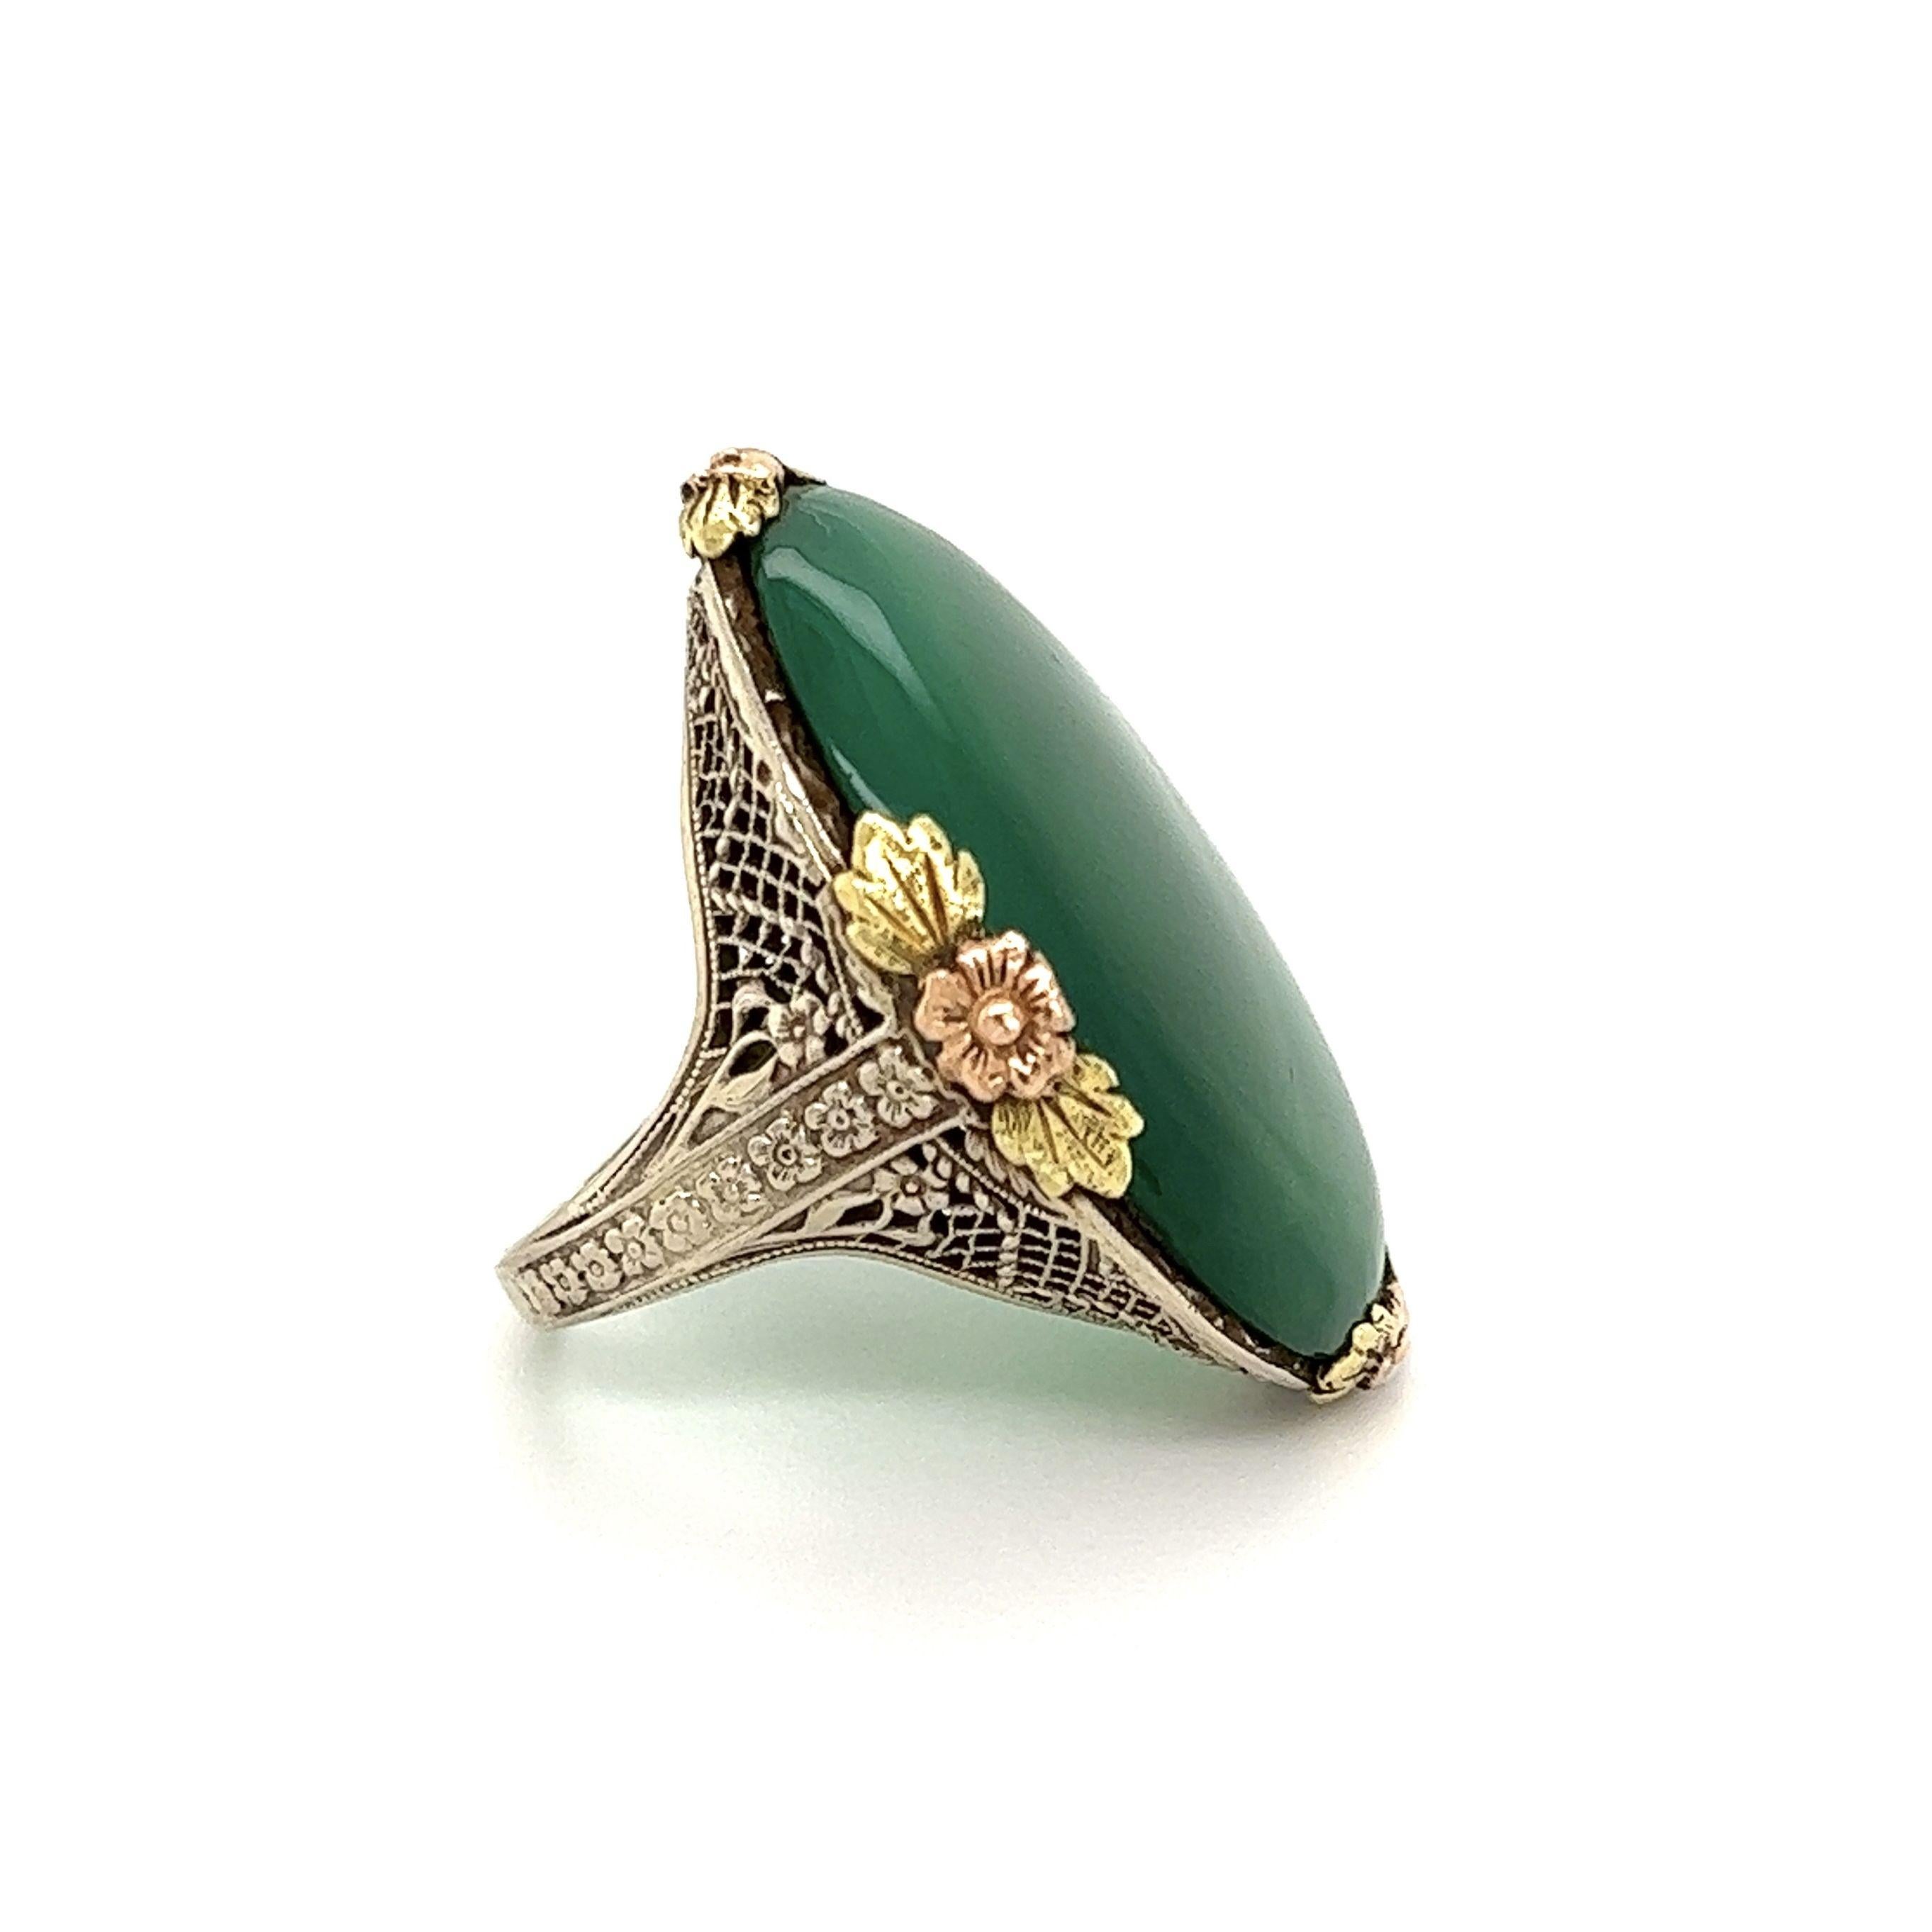 Awesome Solitaire Cocktail Ring, center Hand set with a securely nestled Chalcedony. Artfully Hand crafted Tri-Color 14K Gold mounting. In excellent condition and recently professionally cleaned and polished. Ring size 5.75, we offer ring resizing.